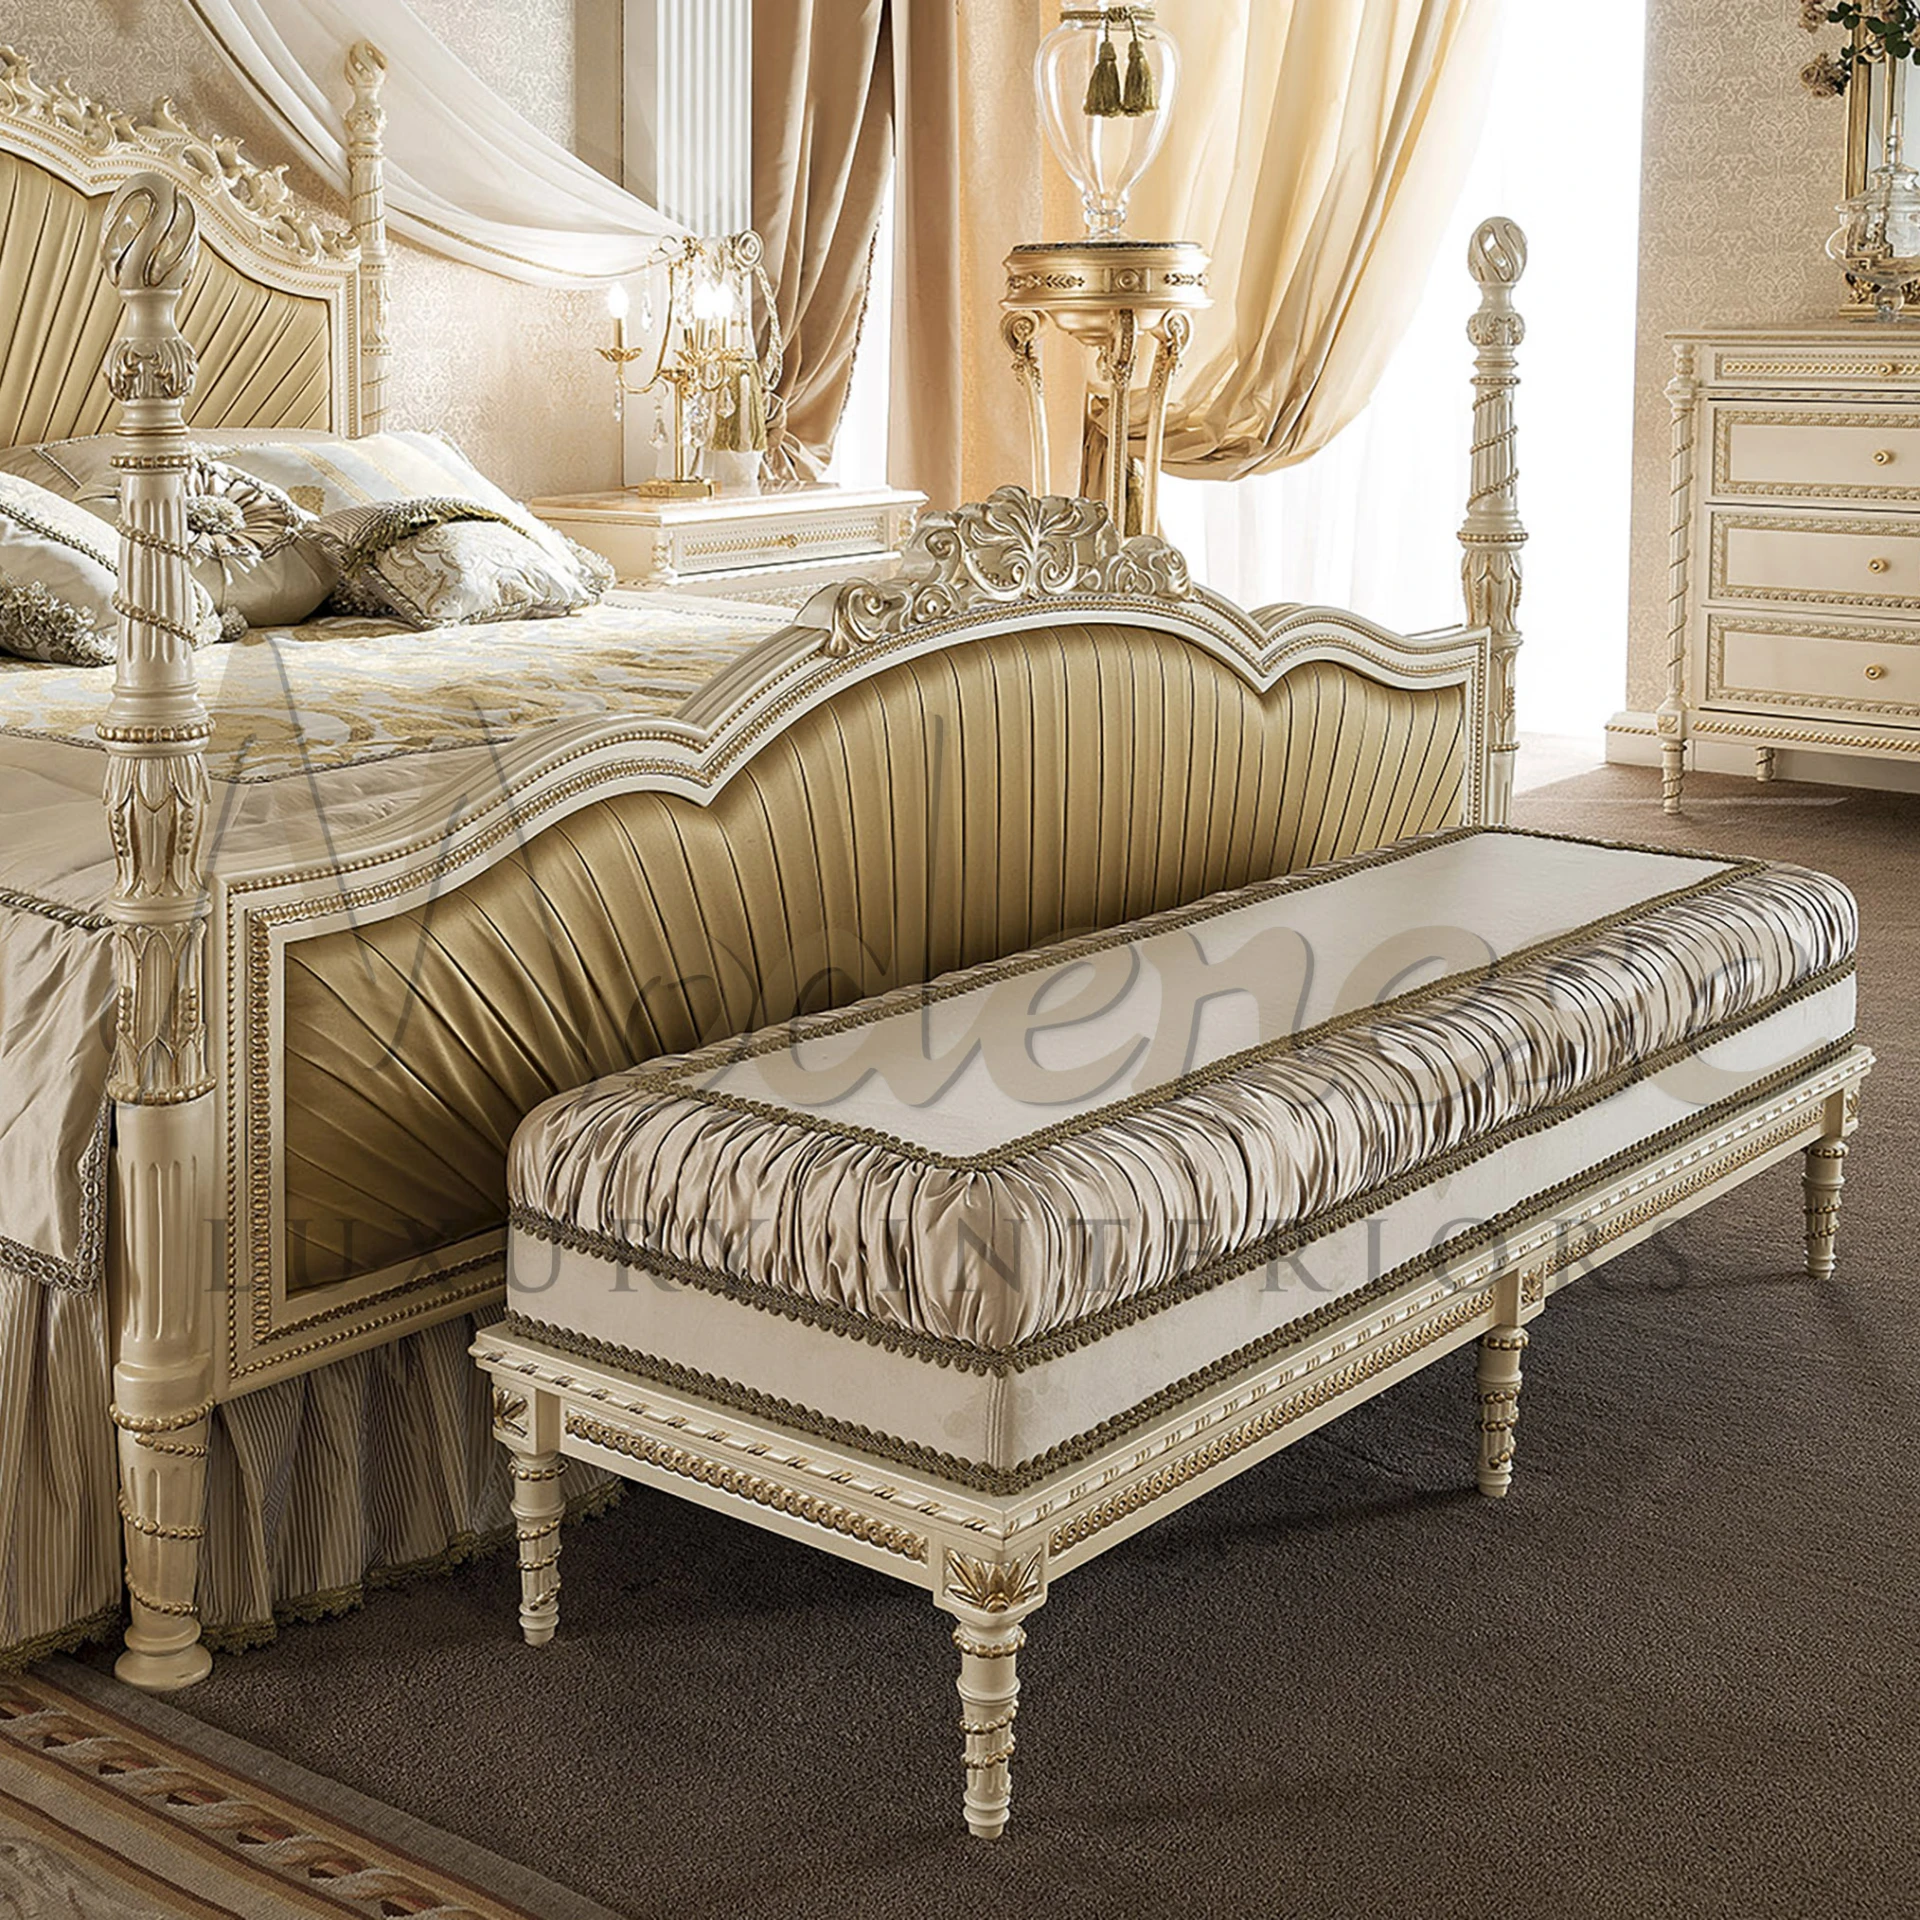 Traditional long bench with fringed beige fabric and carved leg design.                                                                               